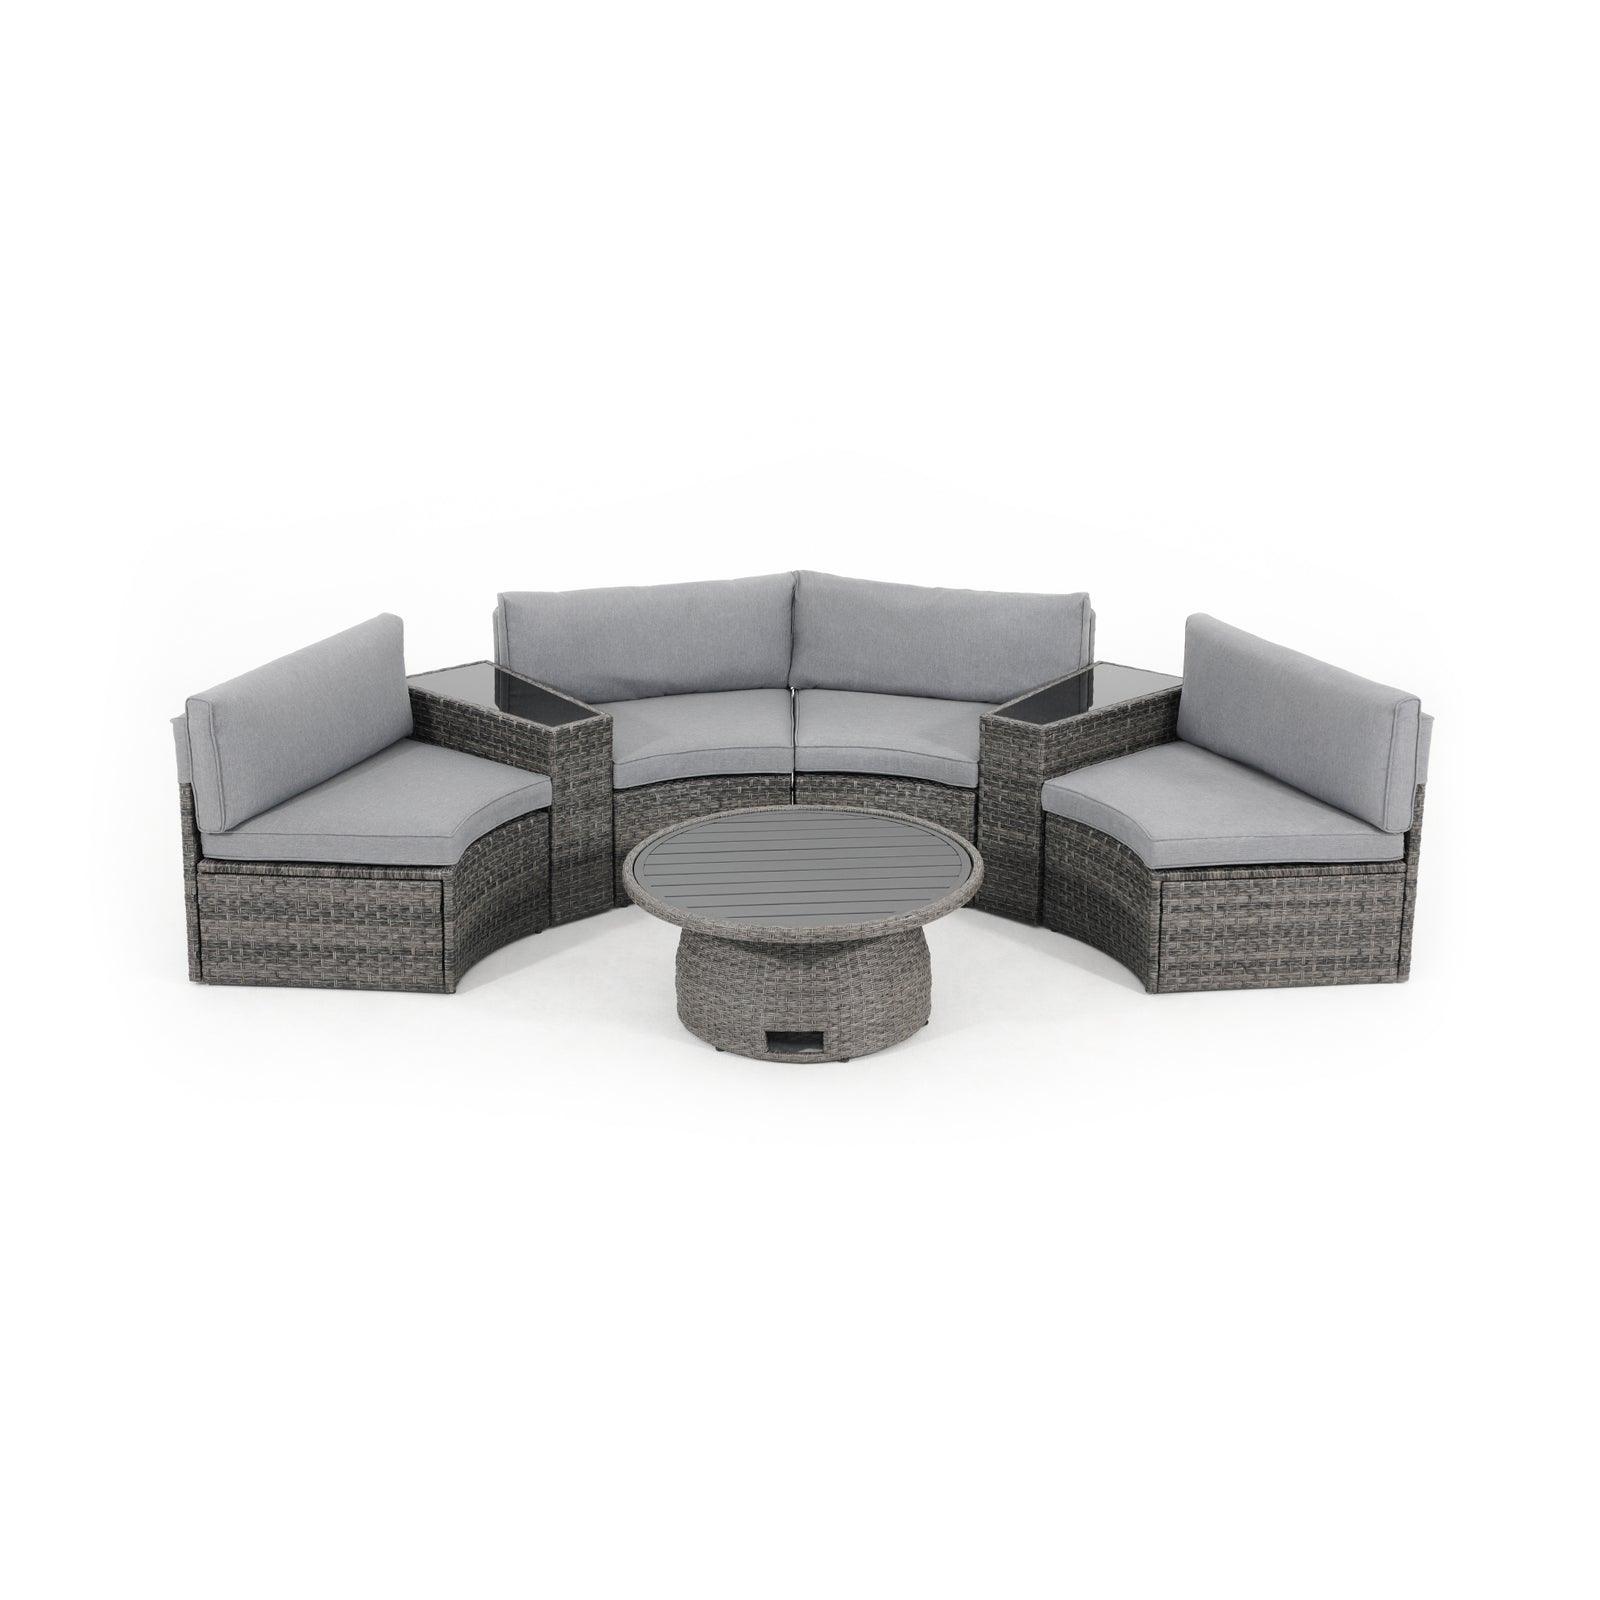 Boboli 4-seater Grey Outdoor Wicker Curved Sectional sofas with grey cushions + 2 wicker side tables + 1 Lift-top round table (fold), front view - Jardina Furniture#color_Grey#piece_7-pc.